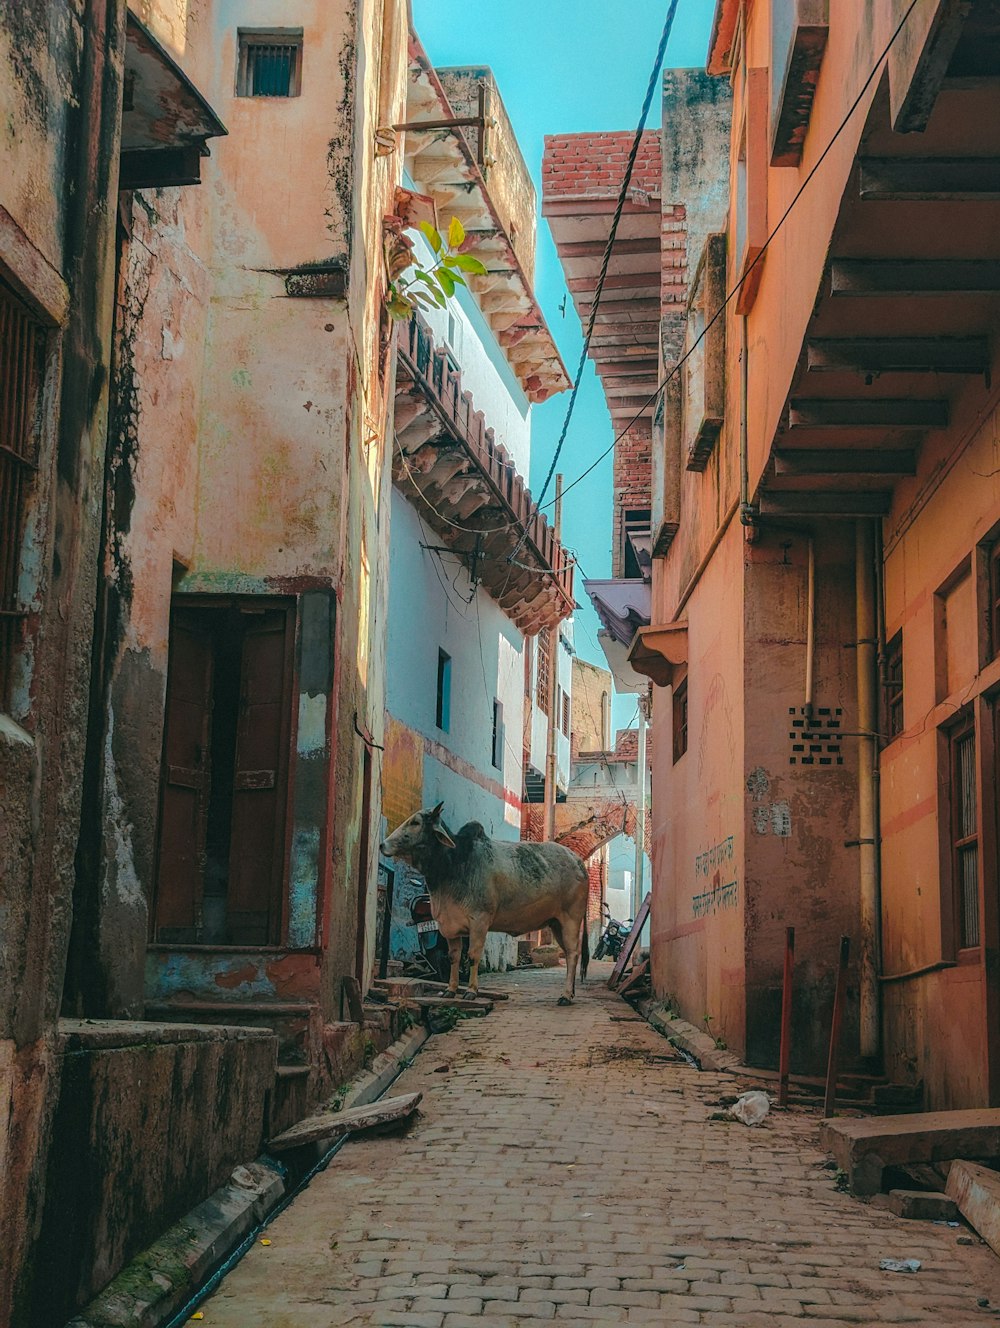 a cow standing in an alley between two buildings